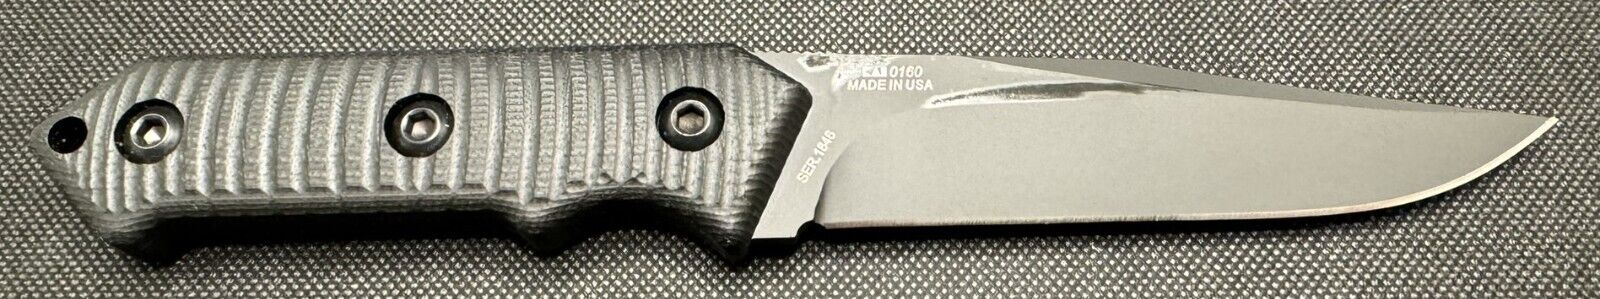 Zero Tolerance 0160 Shifter Fixed Blade Combat Knife New In Box Made in USA